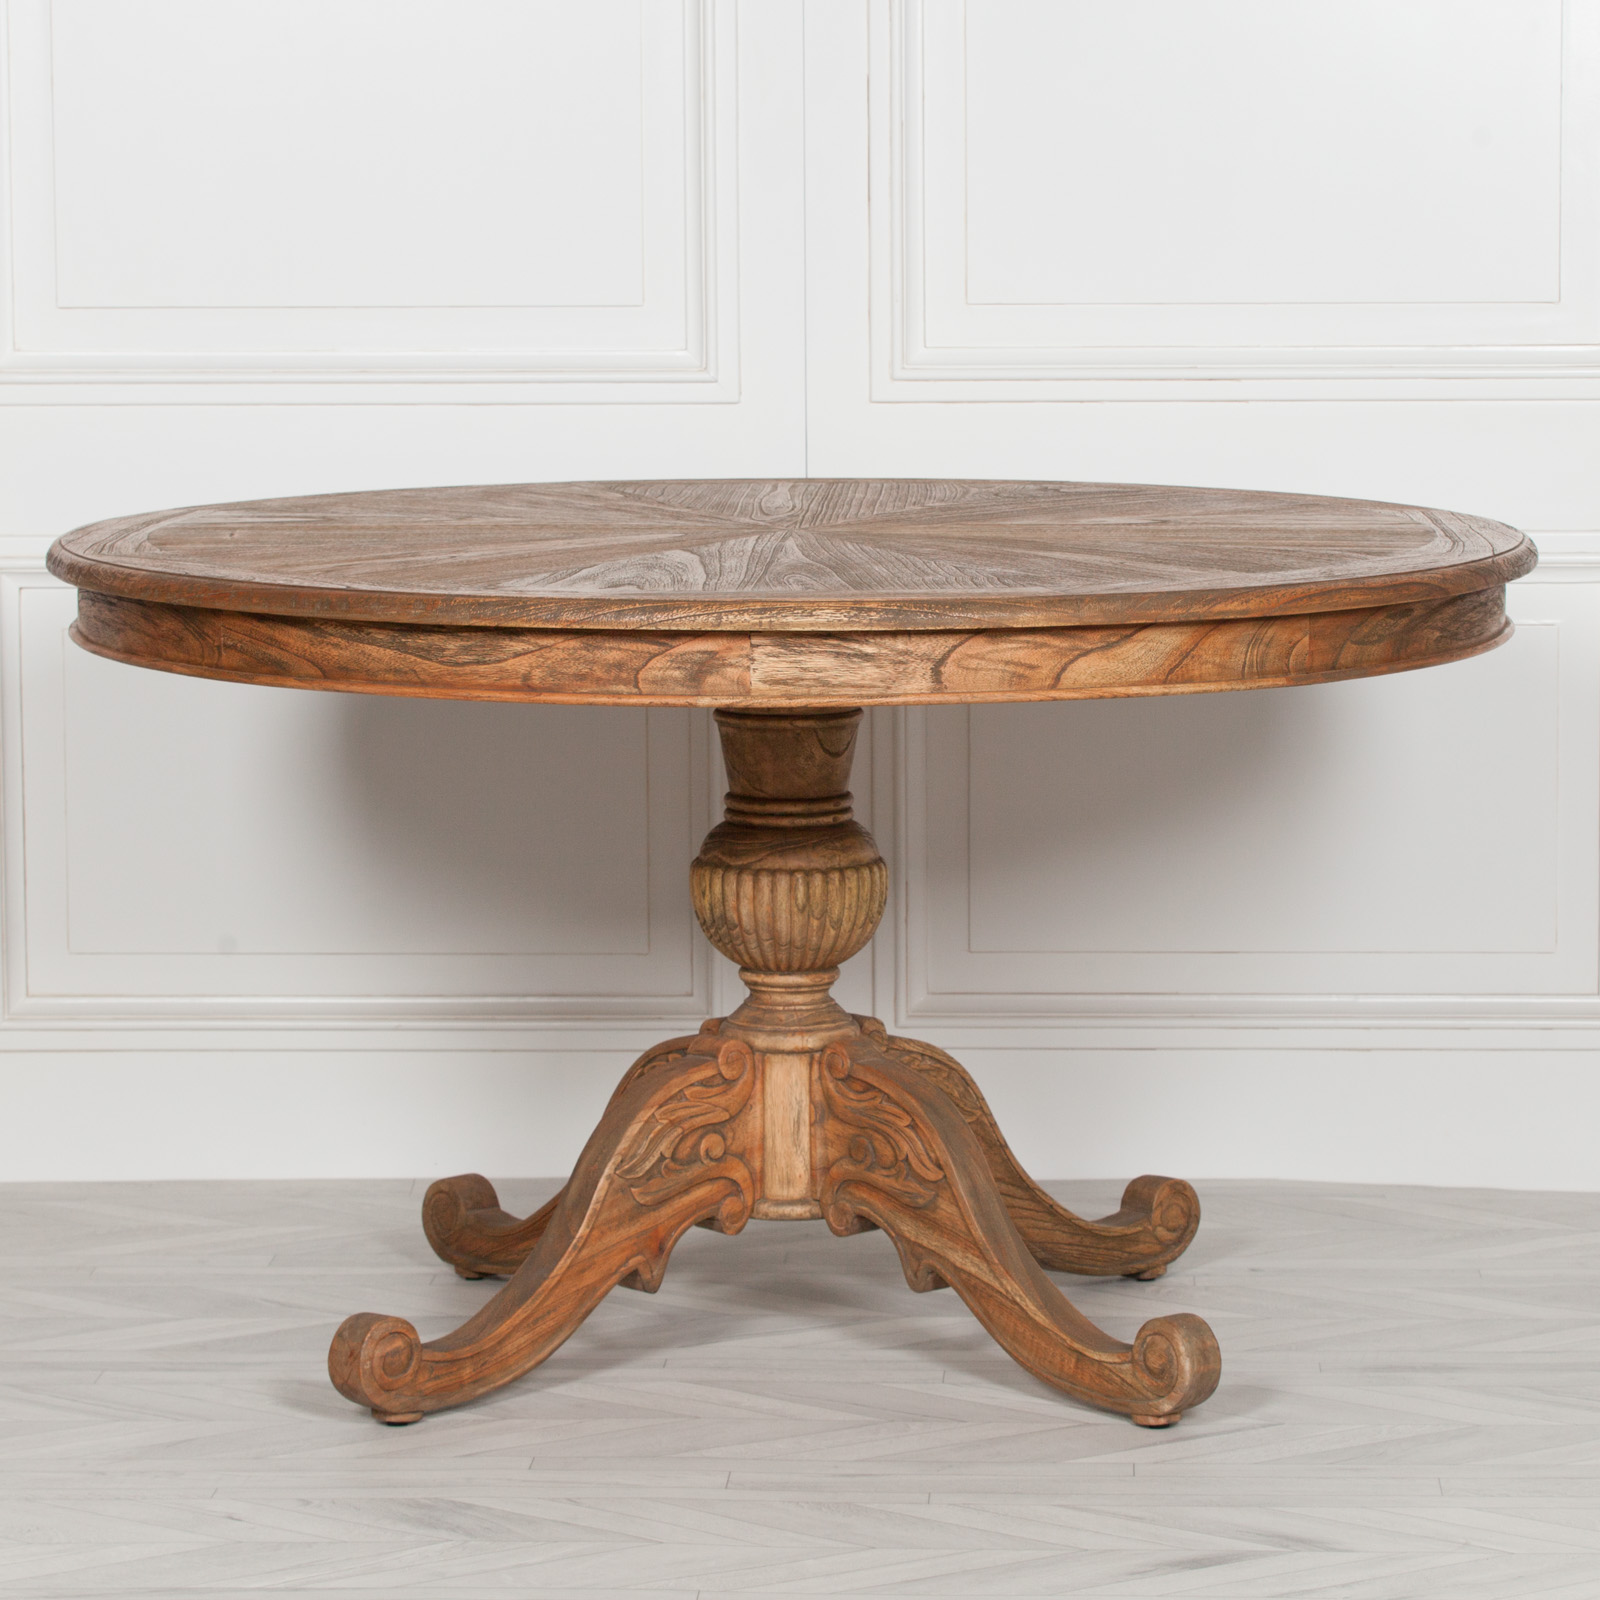 Alisanne Rustic Wooden Round Dining Table Furniture - La ...
